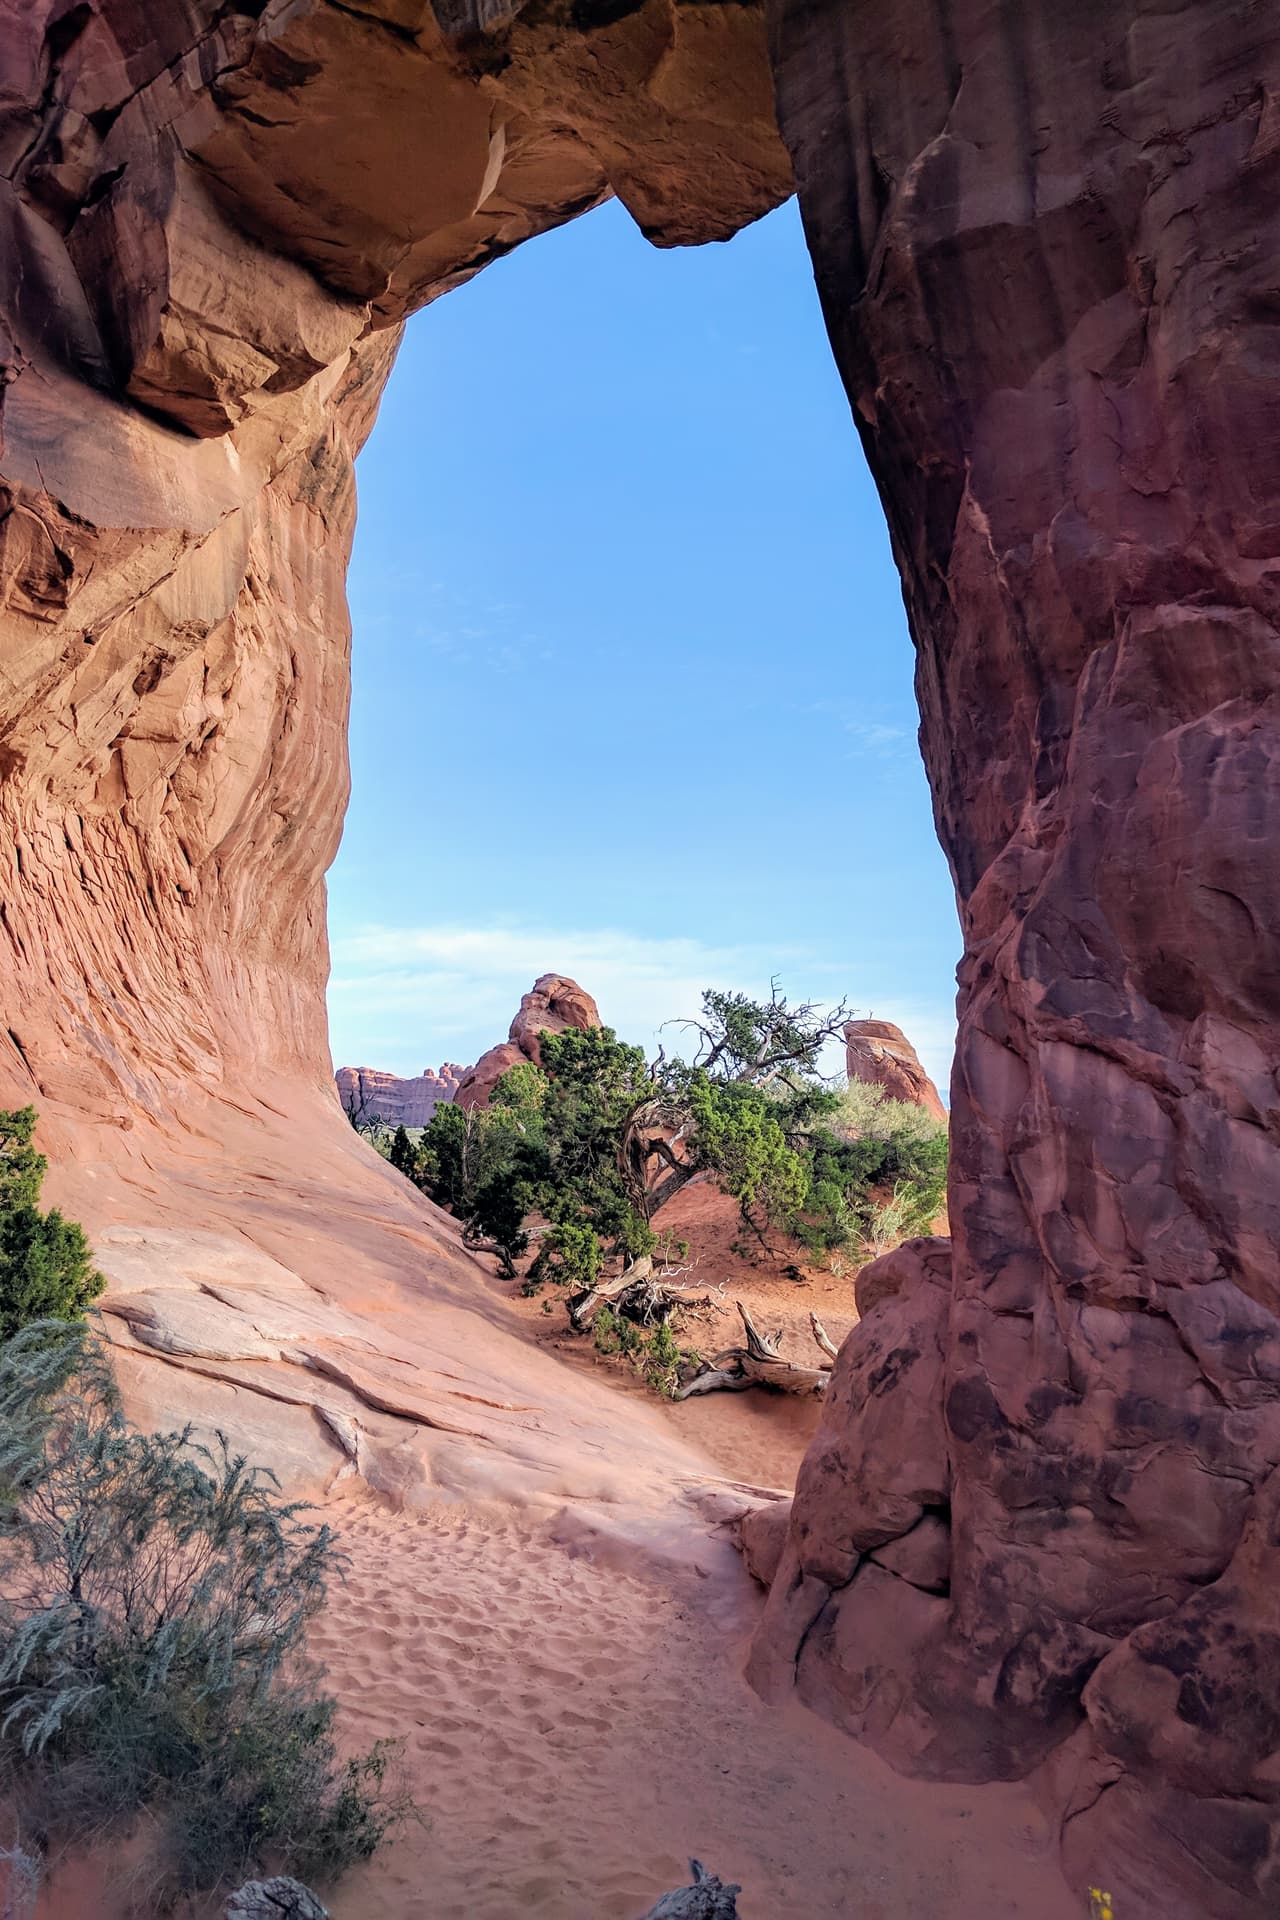 An oblique view through Pine Tree Arch in Arches National Park. The stone of the arch is exceptionally red, and the ground very sandy. A small juniper tree is growing almost in the middle of the arch.